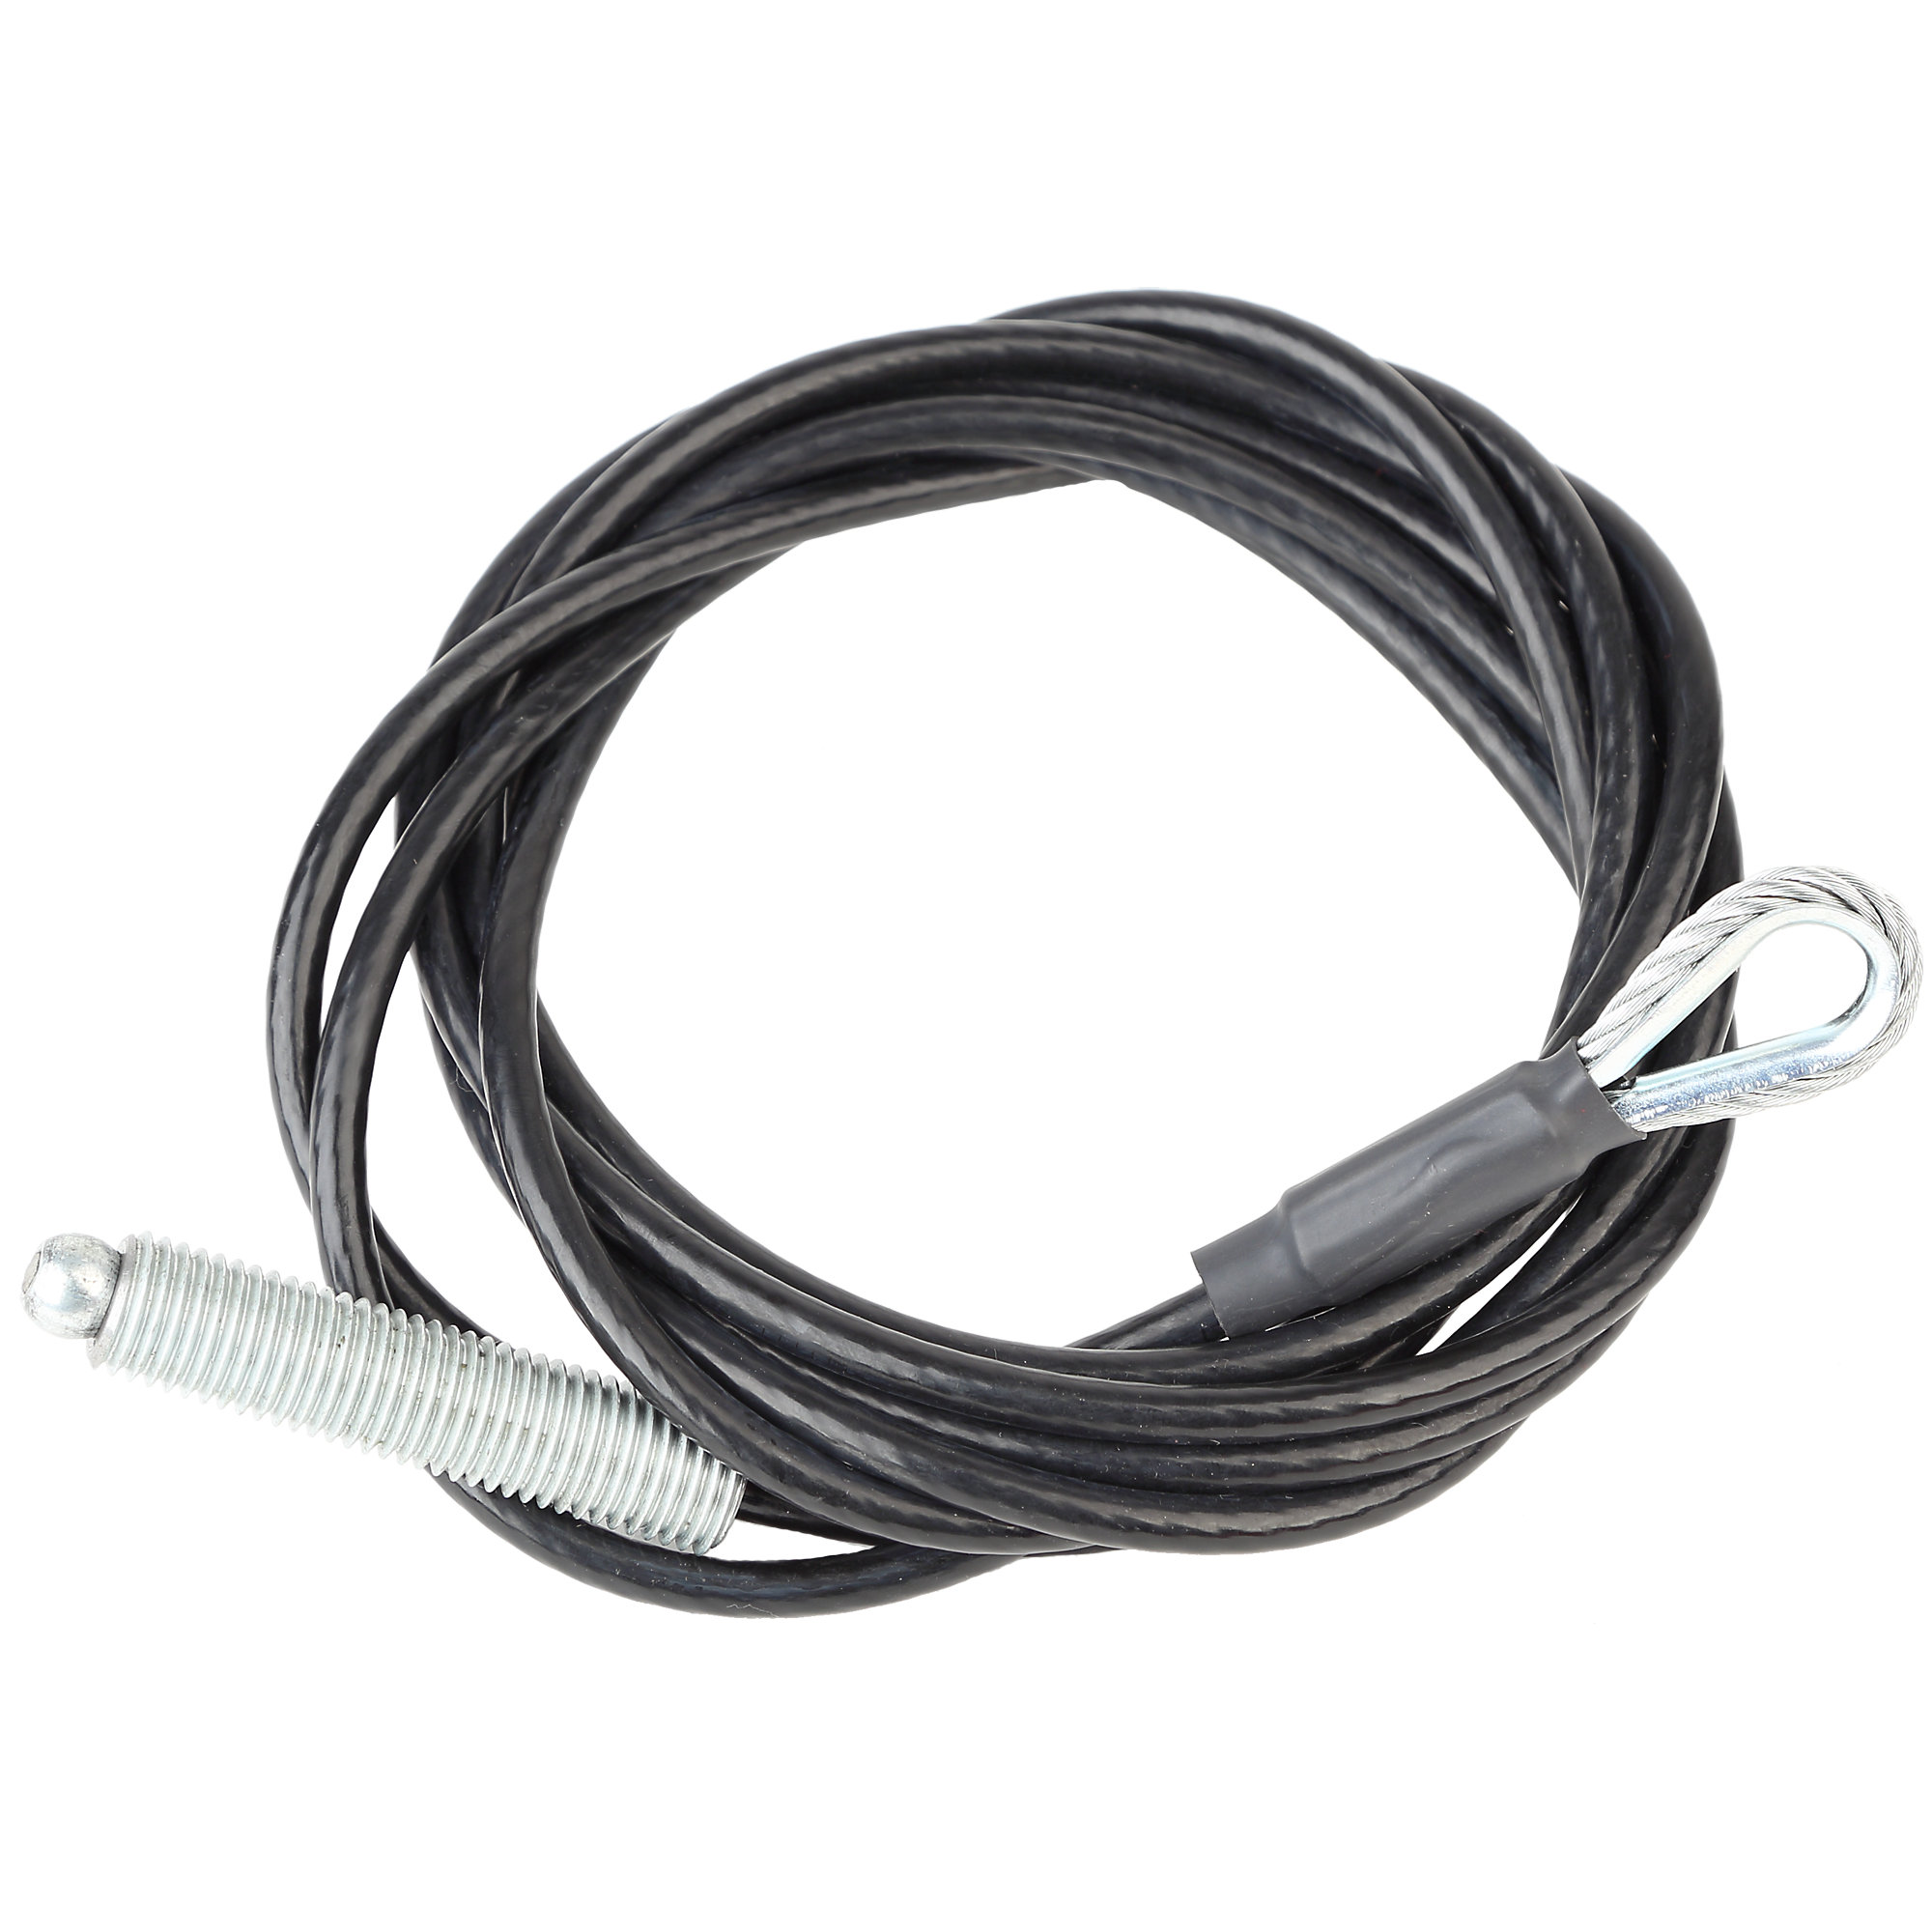 Cable for Lat Pulldown SU45 by LifeFitness, 106"